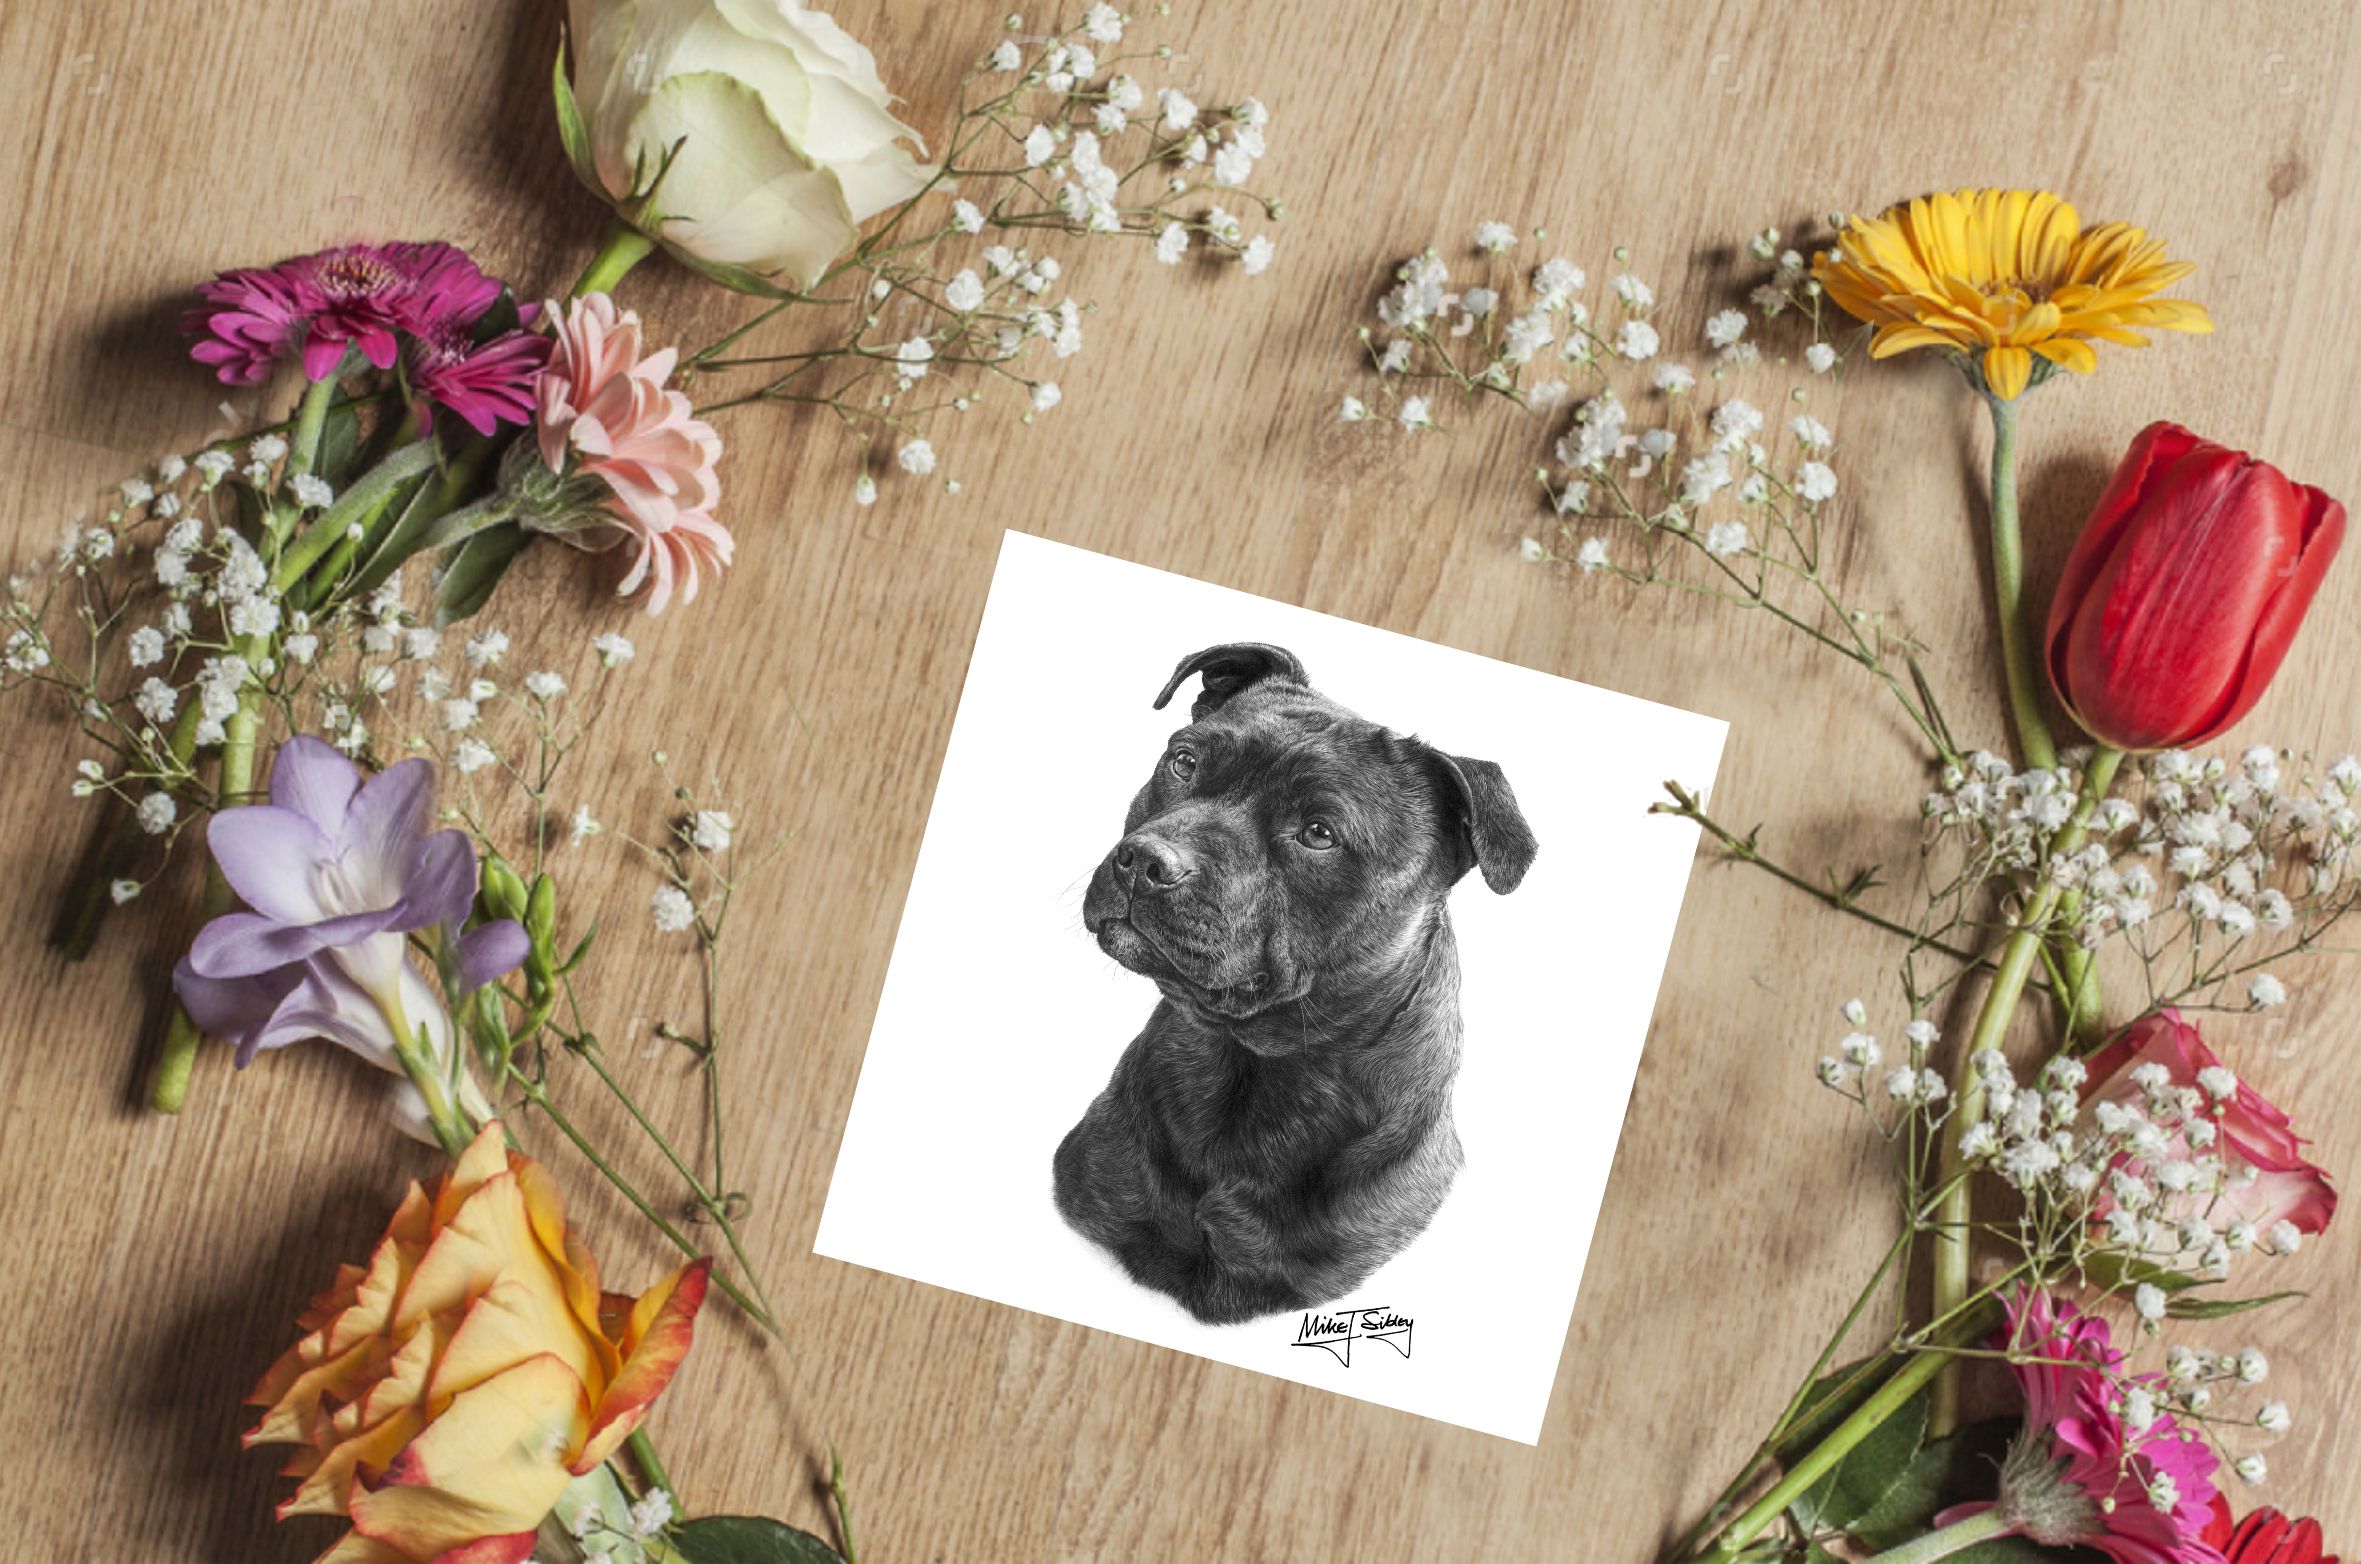 Mike Sibley Design Staffordshire Bull Terrier Greeting Card